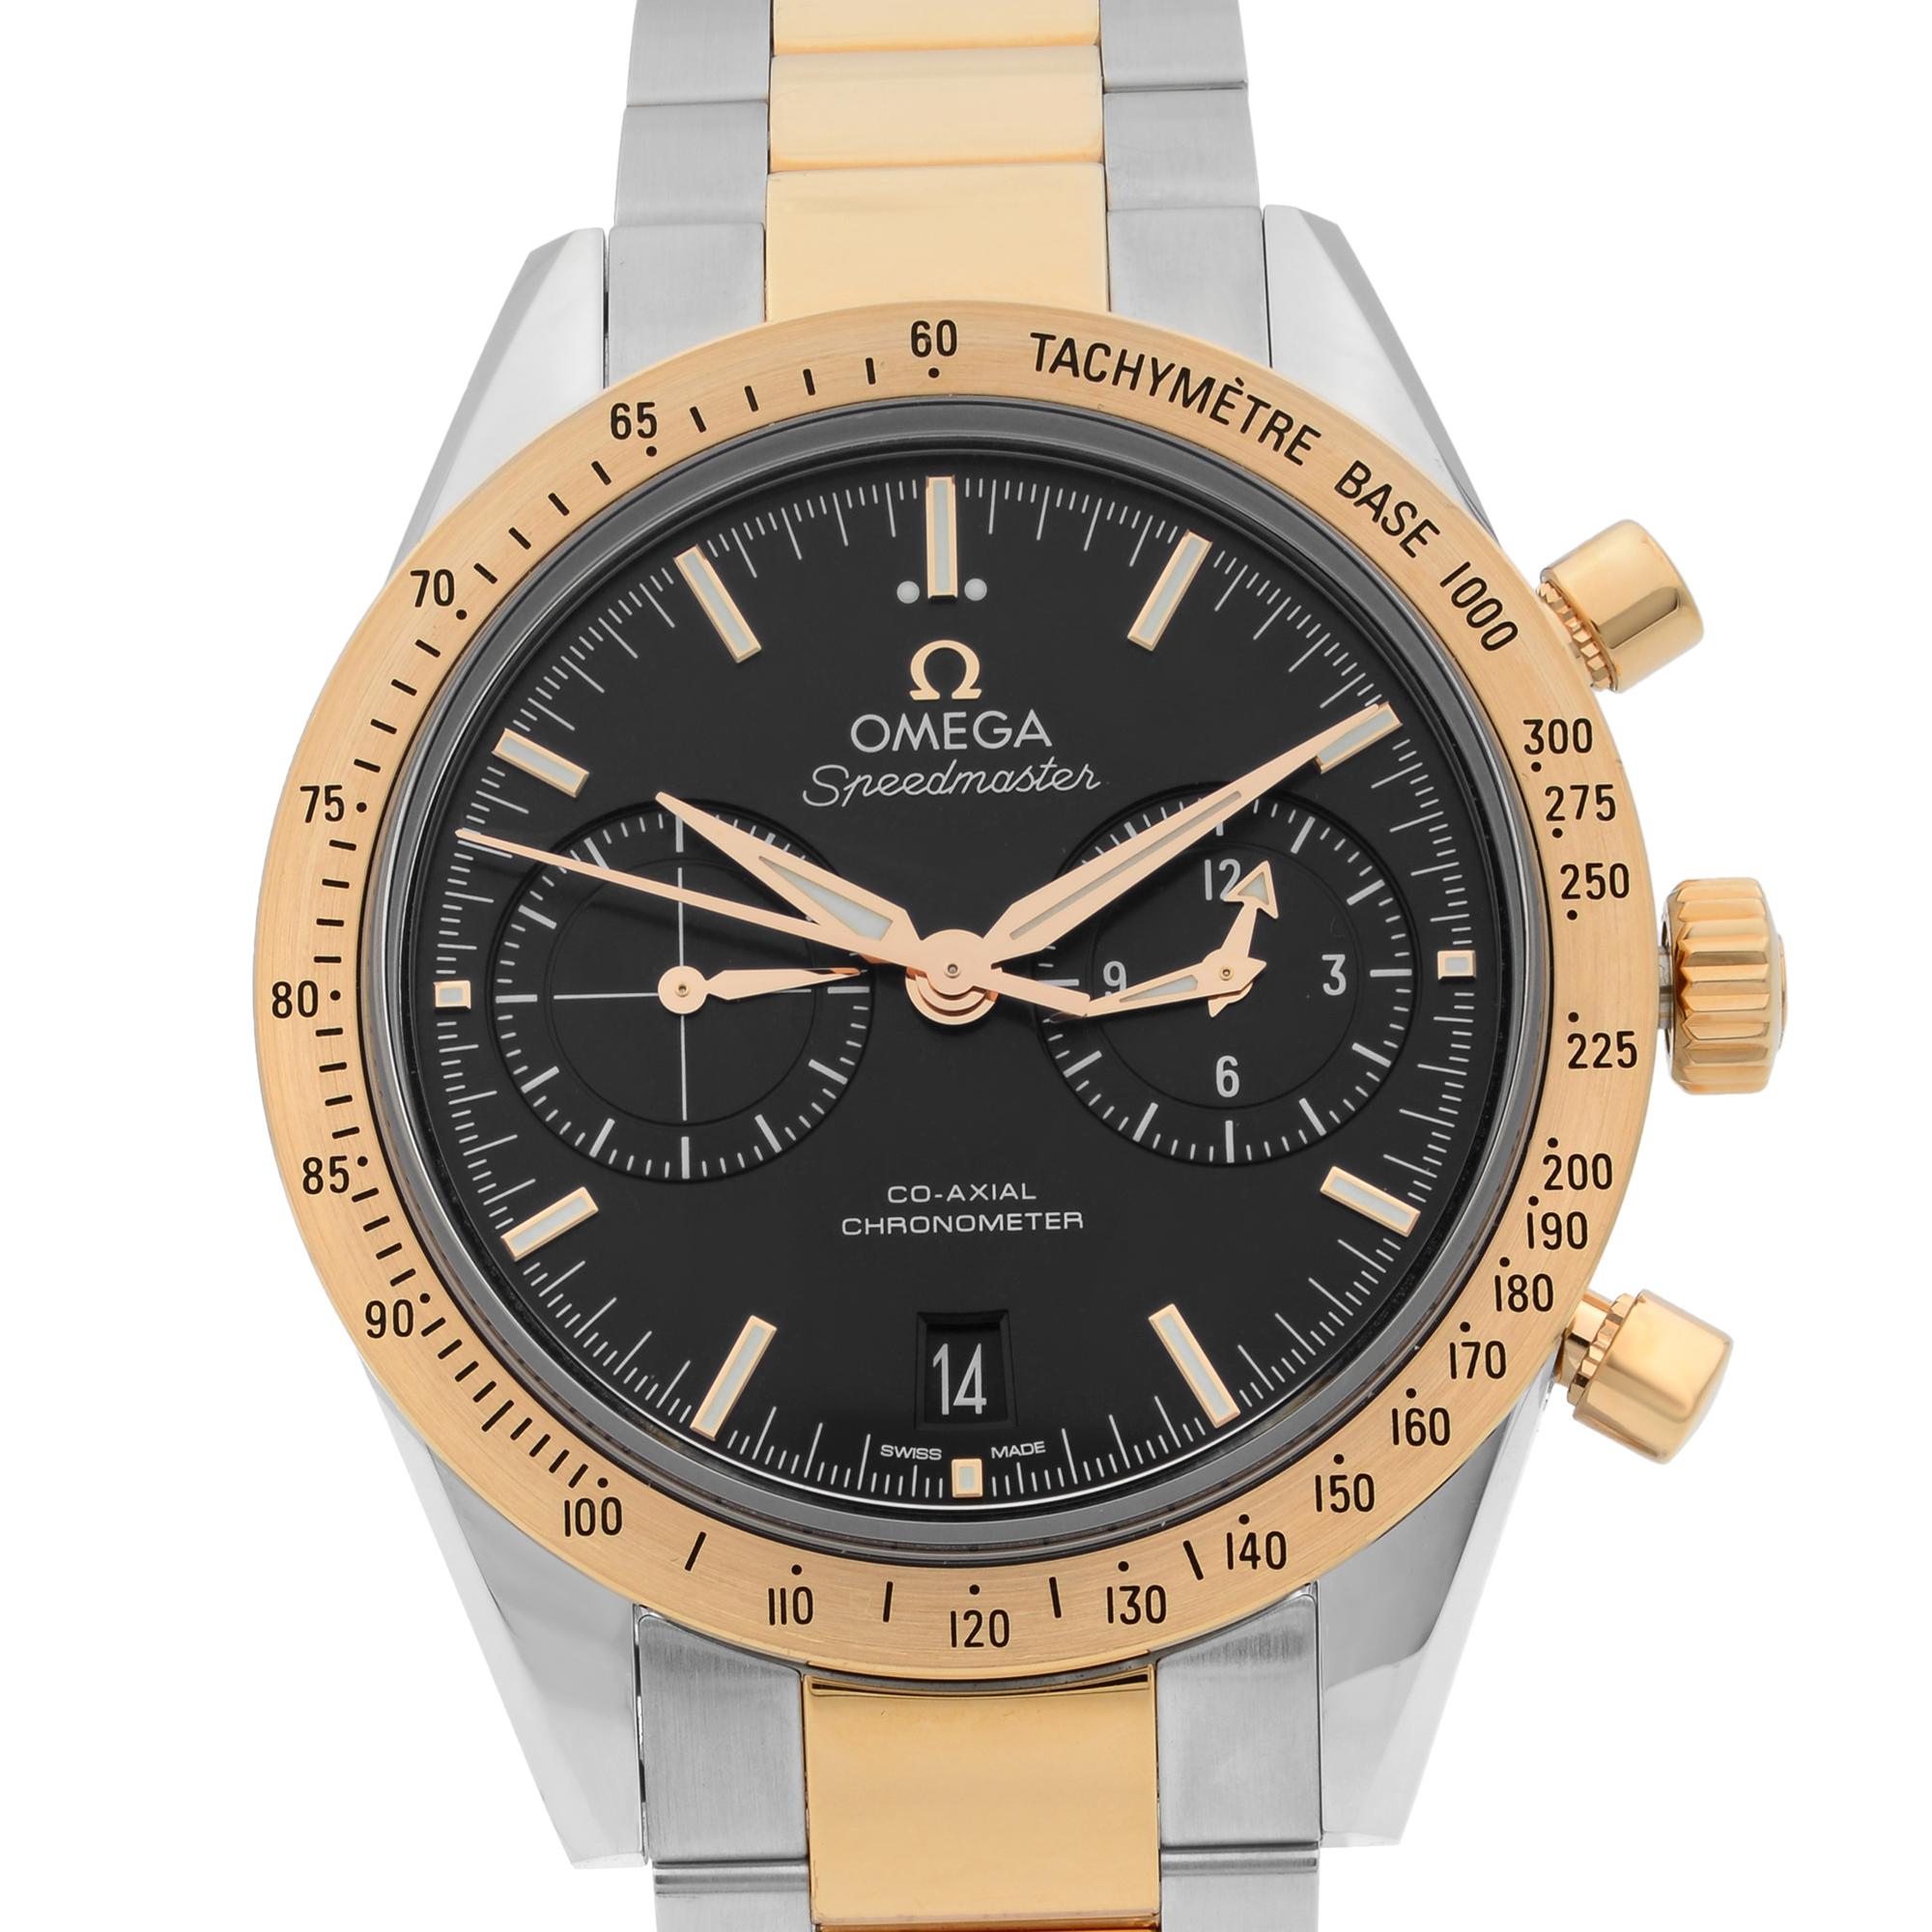 Display Model Omega Speedmaster 18k Rose Gold Steel Automatic Men's Watch 331.20.42.51.01.002. This Beautiful Timepiece Features: Stainless Steel Case with a Stainless Steel Bracelet with 18k Rose Gold Center Links, Fixed 18k Rose Gold Bezel Showing